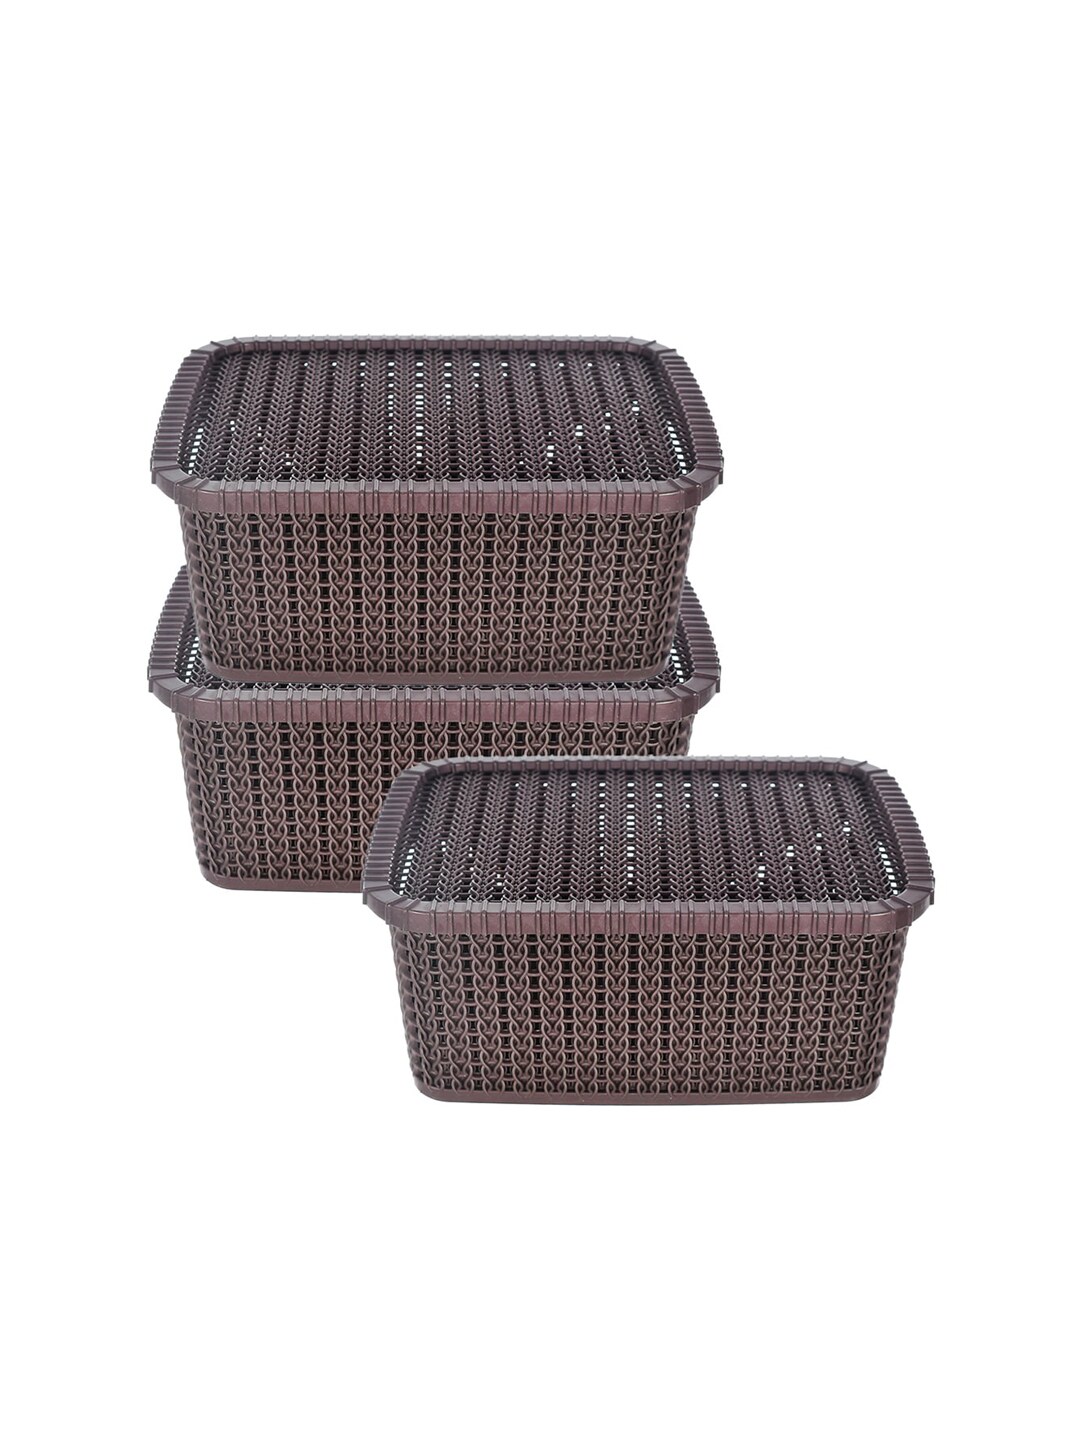 Kuber Industries Set Of 3 Brown Textured Plastic Baskets With Lids Price in India